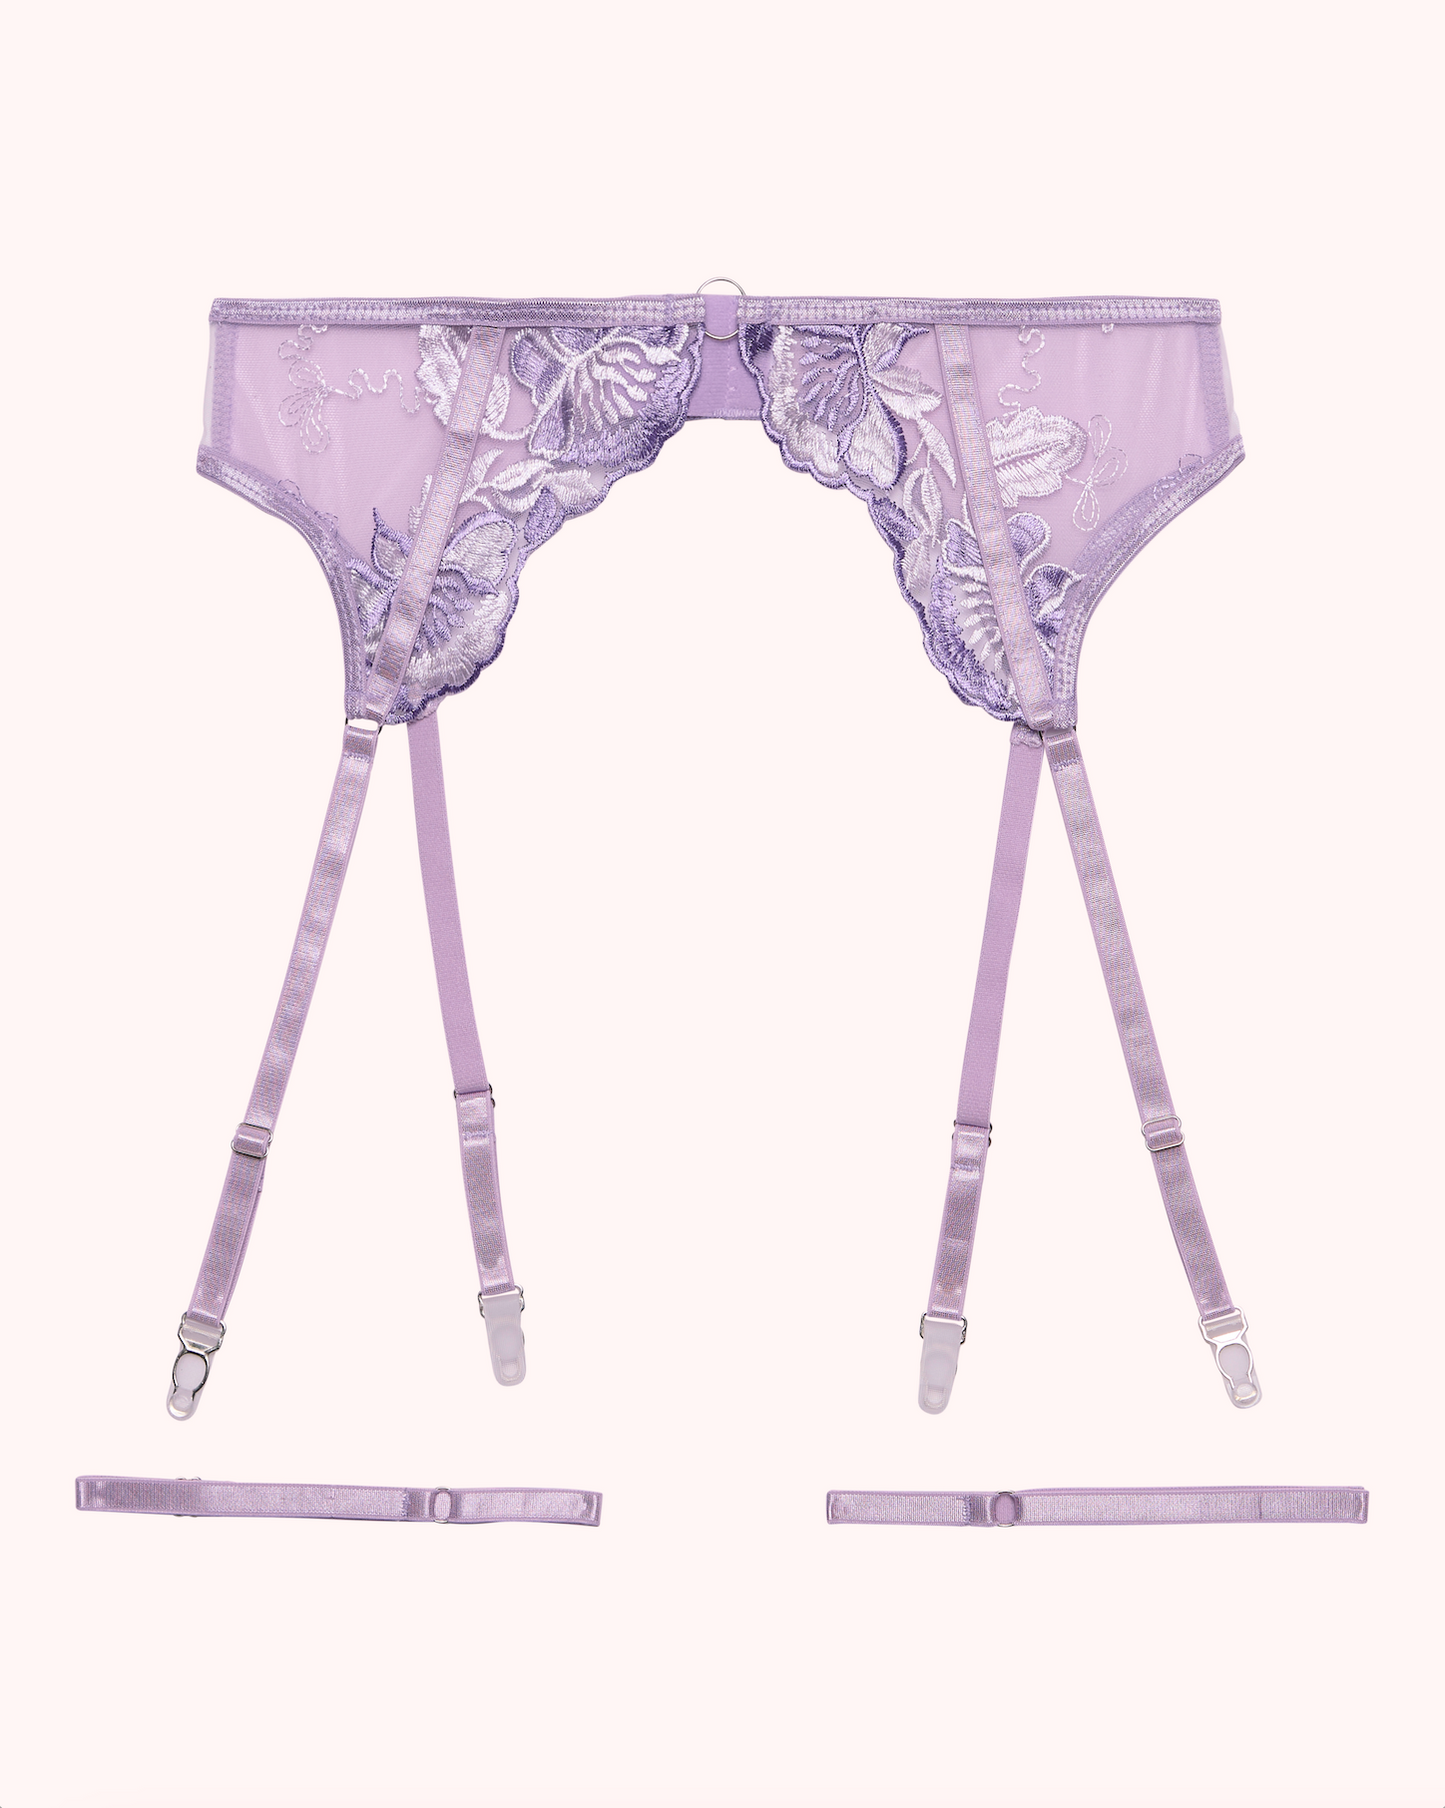 The Lilac Frost Set